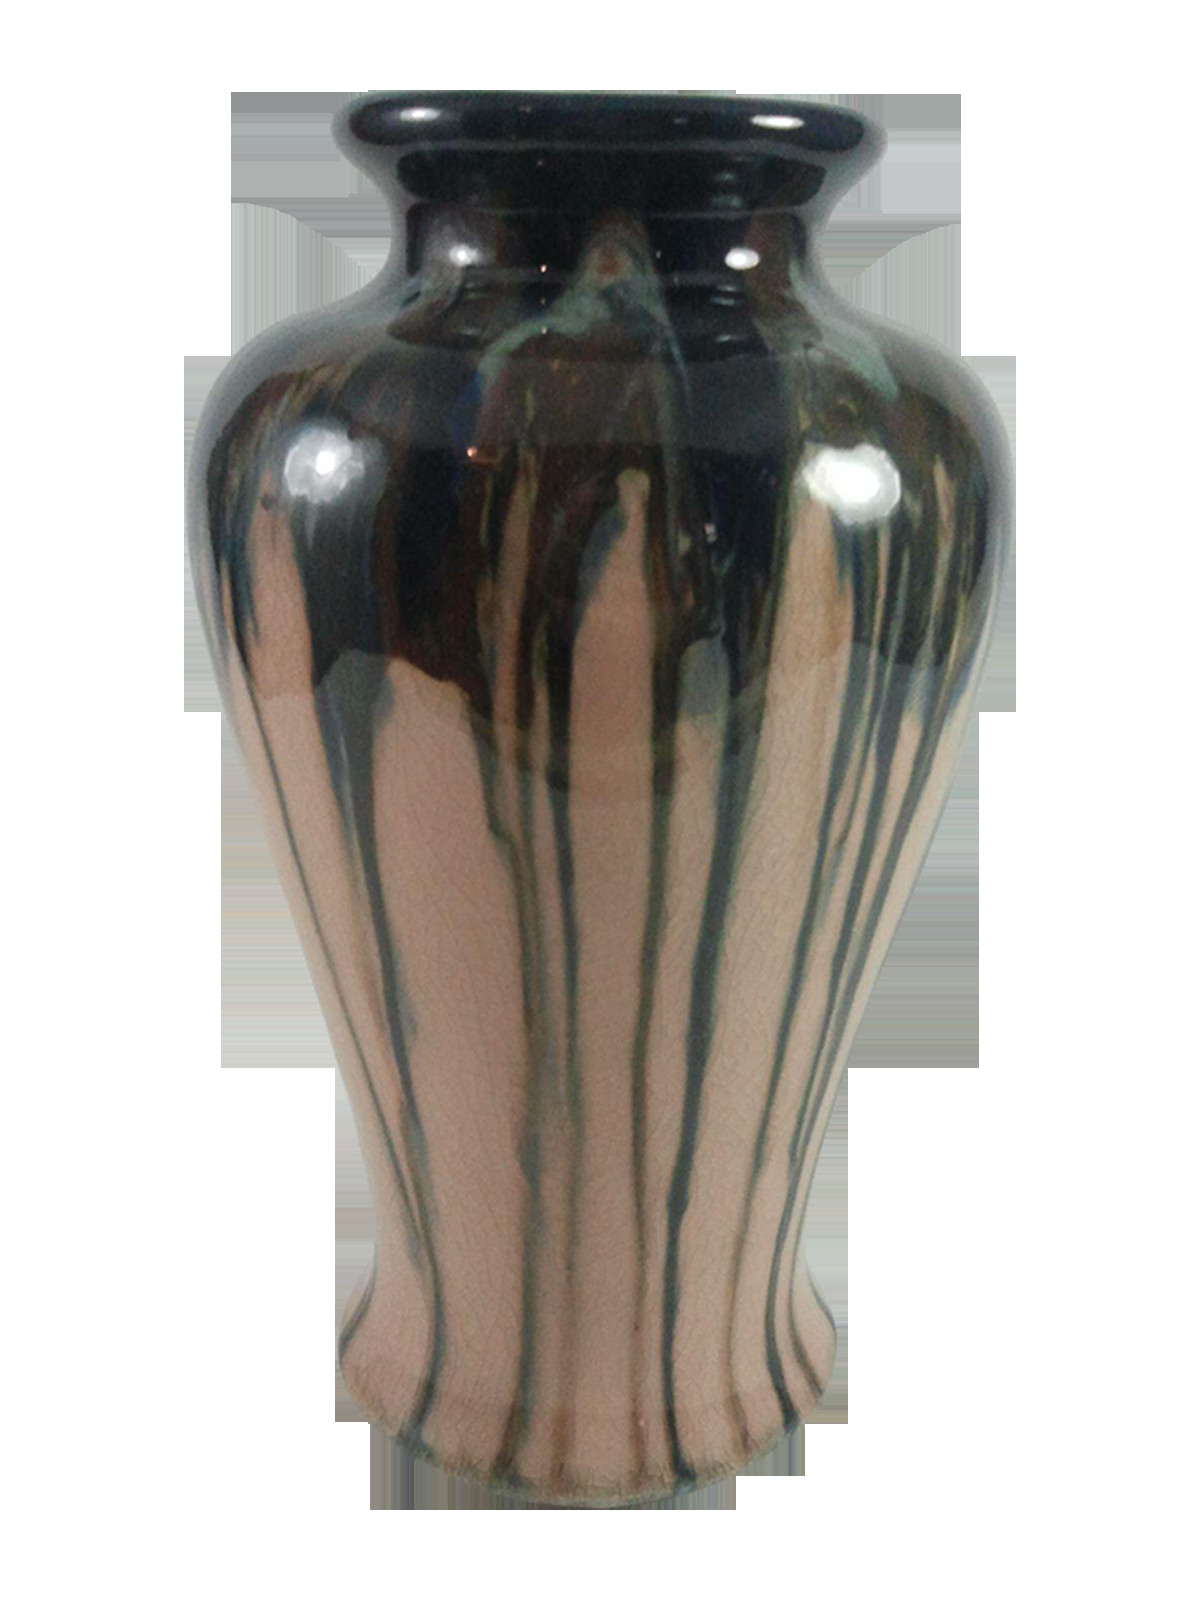 10 Stunning Ceramic Urns and Vases 2023 free download ceramic urns and vases of intense blues and browns in a drip glaze make this vase one of a intended for intense blues and browns in a drip glaze make this vase one of a kind in super conditi